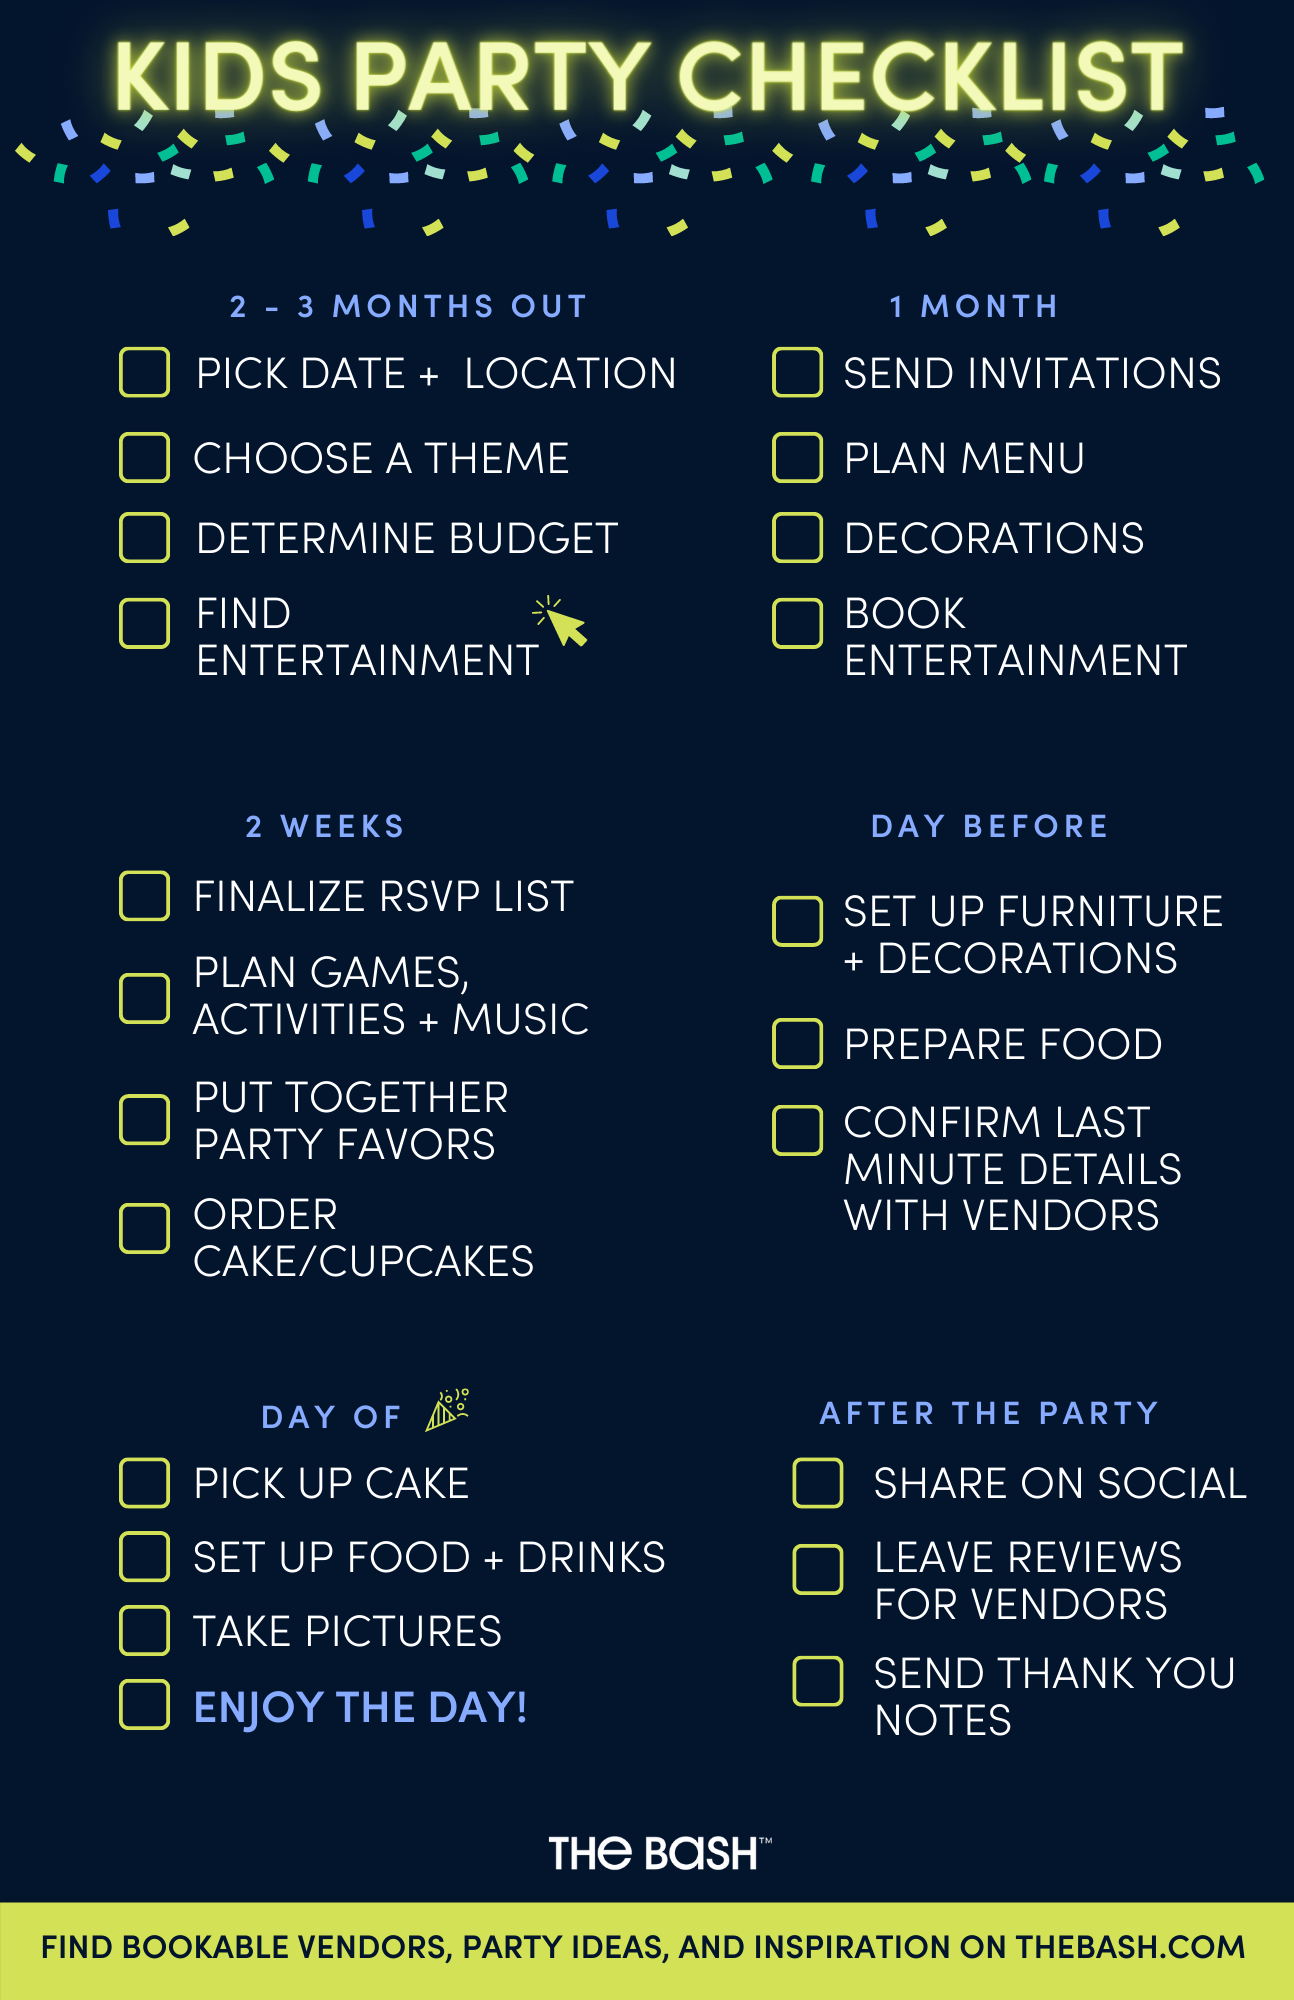 Download this Kids Party Checklist PDF